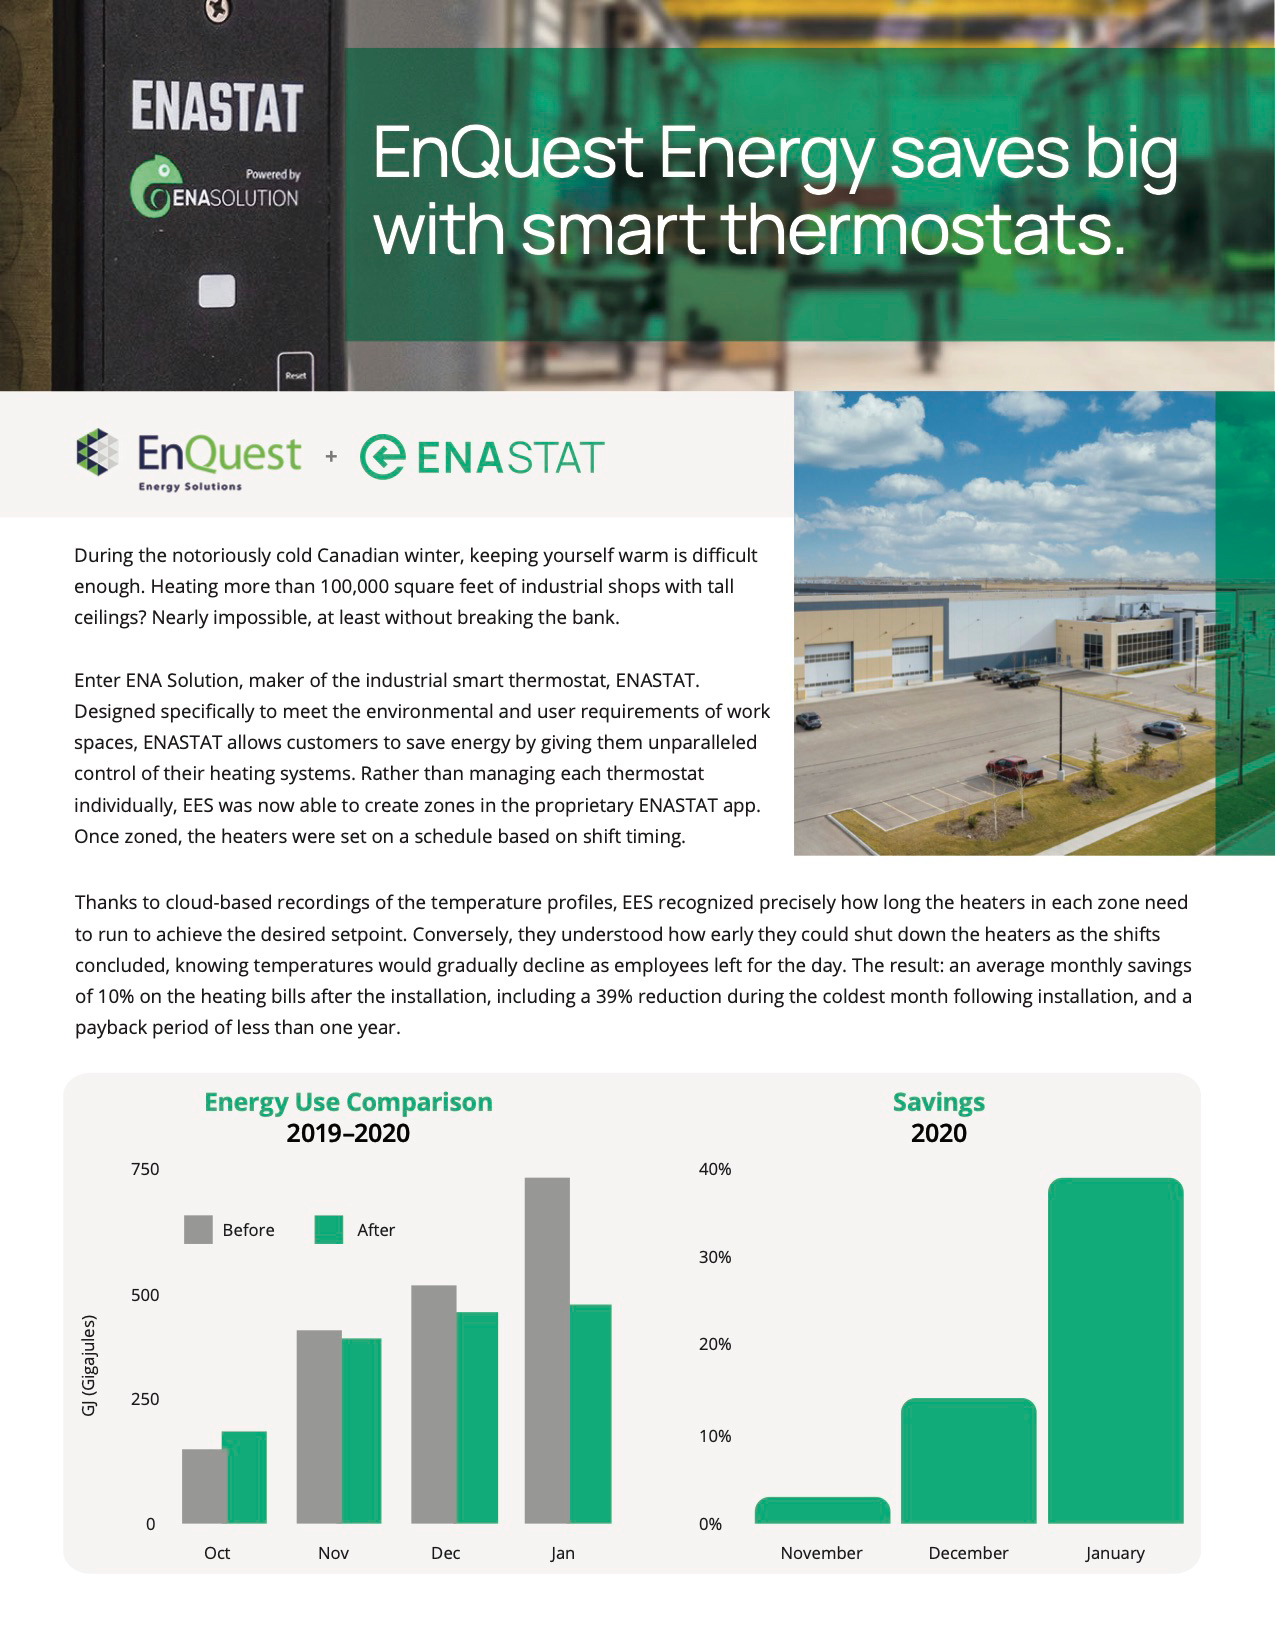 EnQuest Energy Saves Big with Smart Thermostats